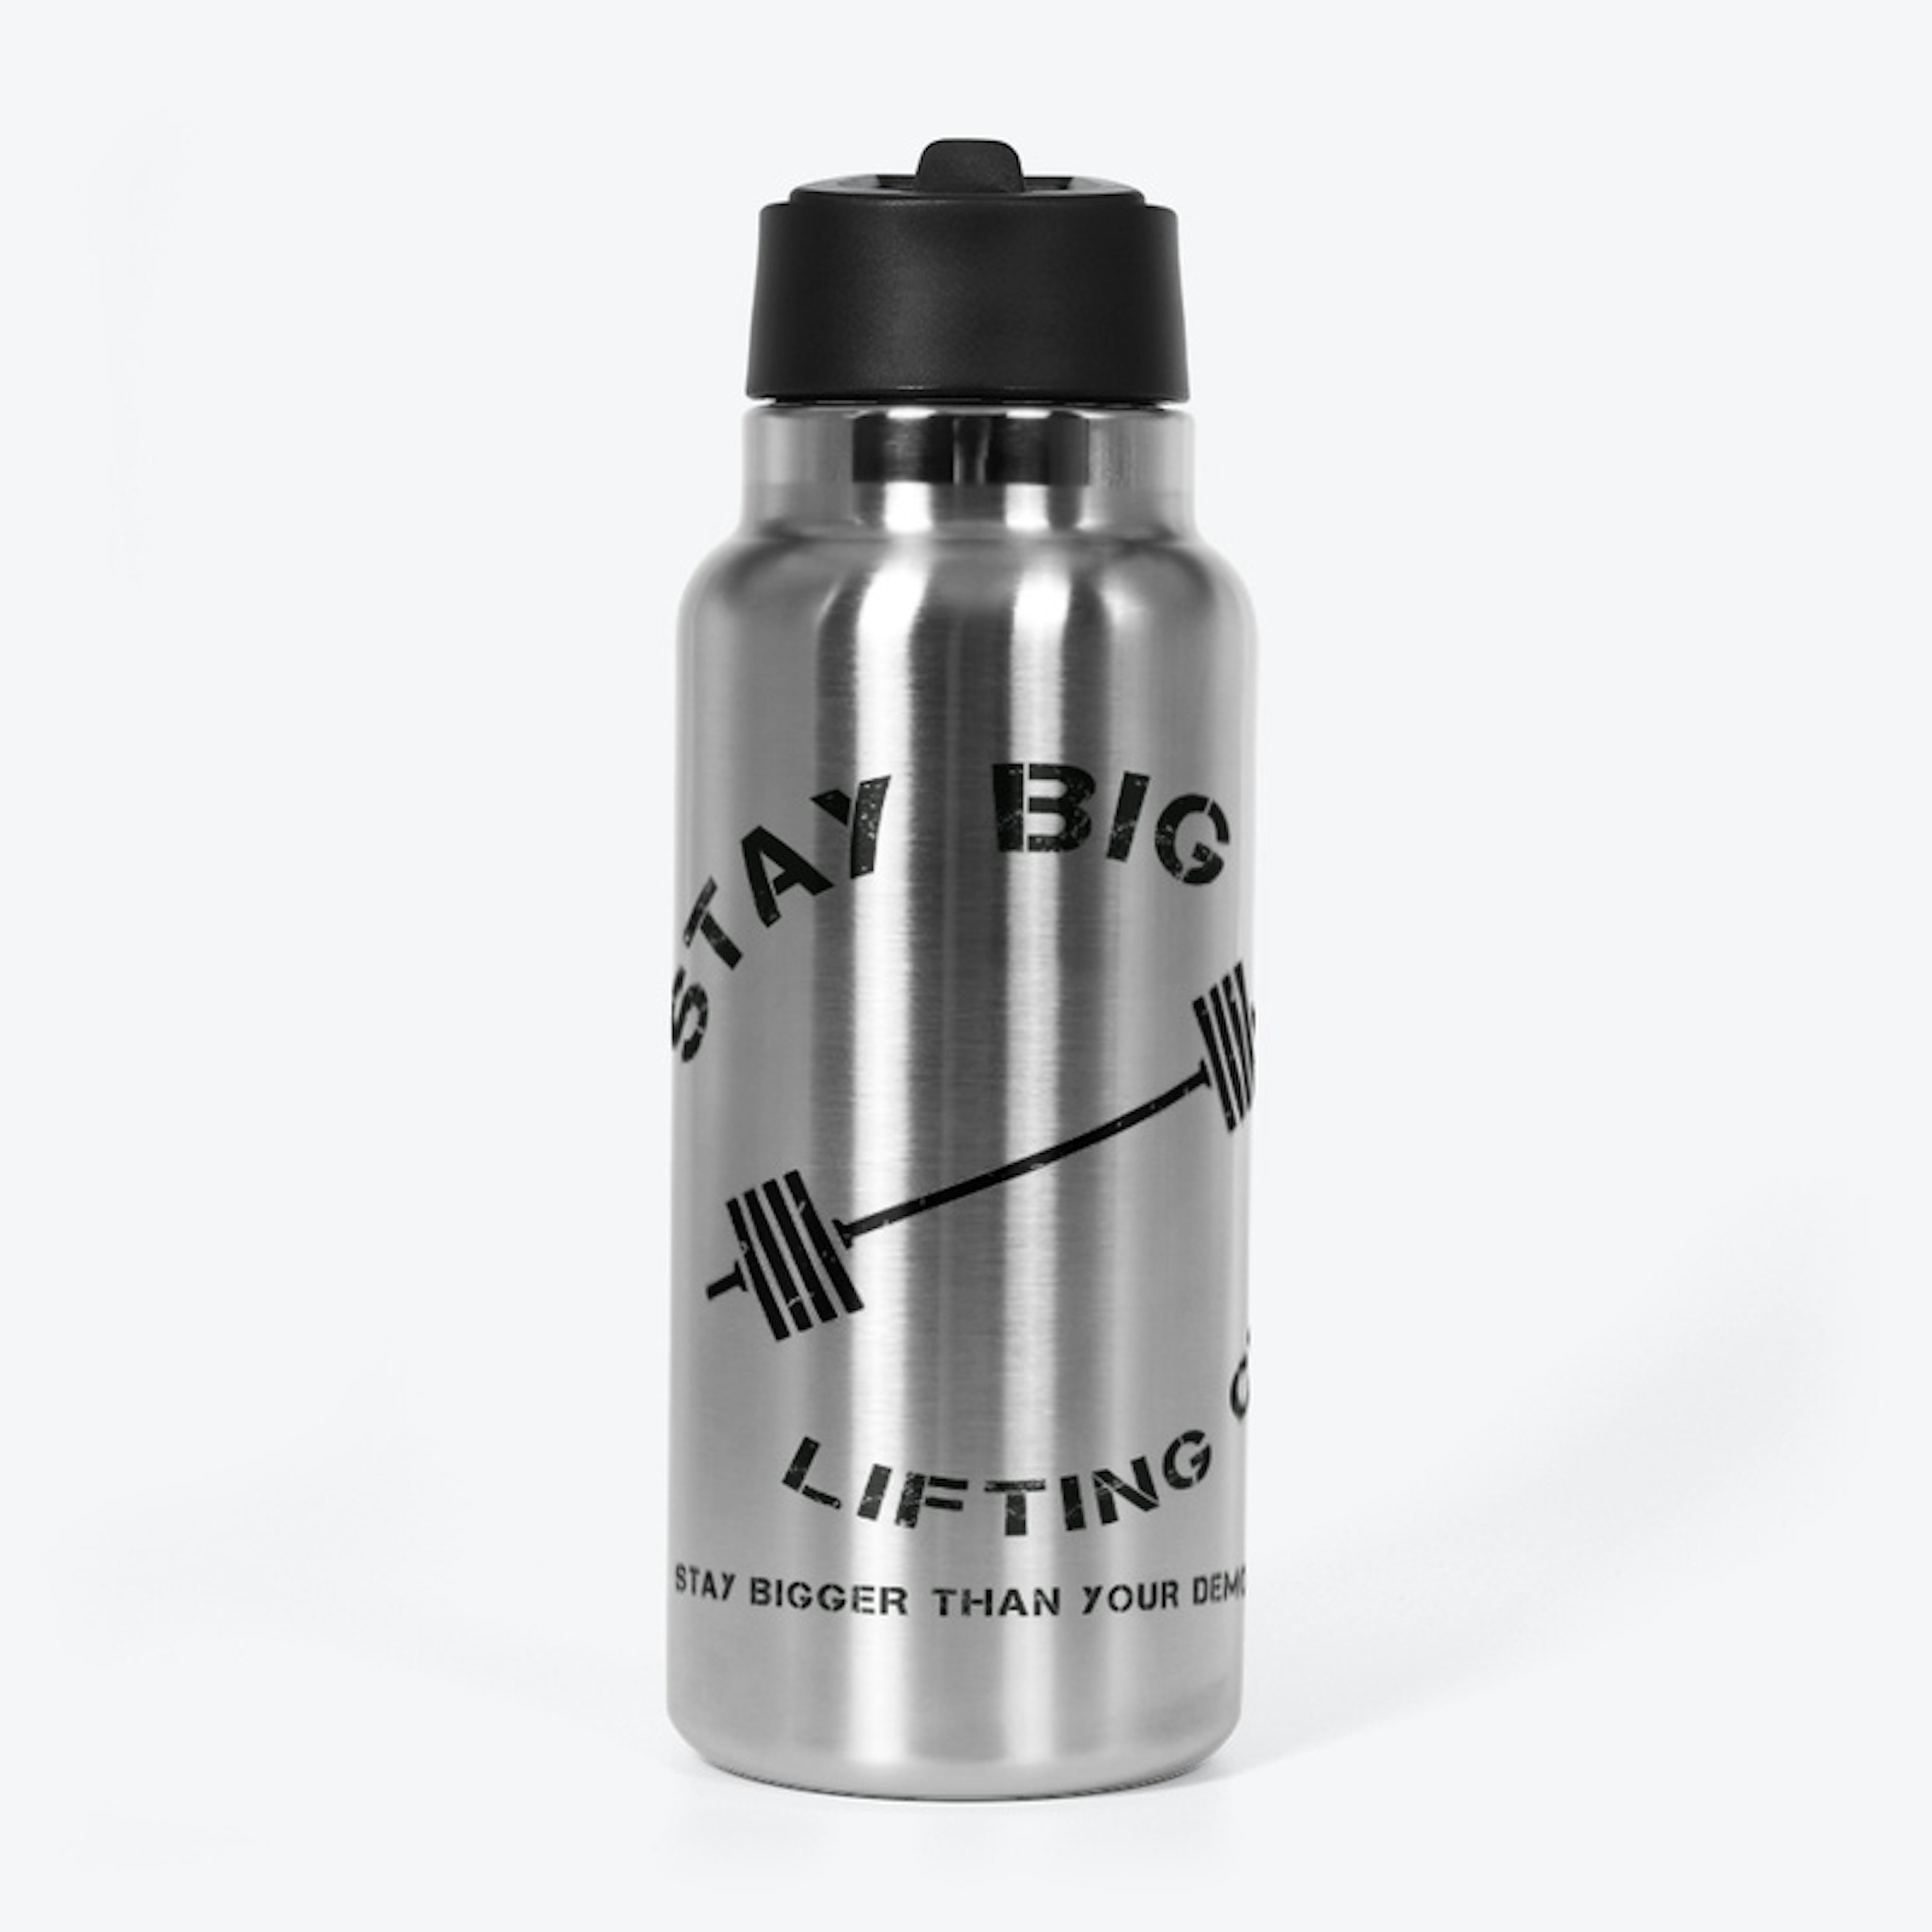 Stay Big Stainless Water Bottle